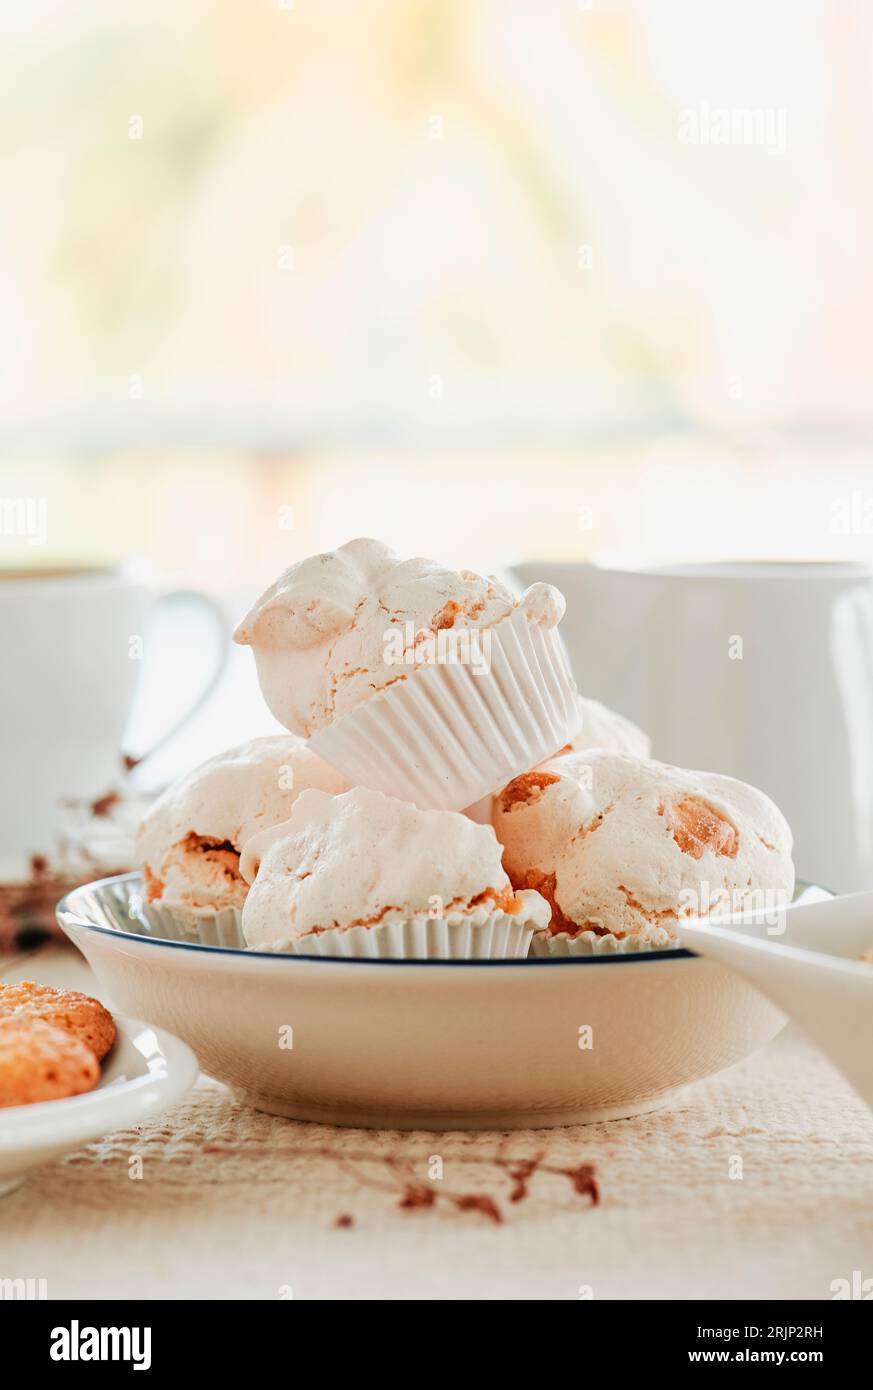 closeup of a white ceramic bowl with some spanish merengues almendrados, baked meringues with almonds, placed on a table next to some ceramic bowls an Stock Photo